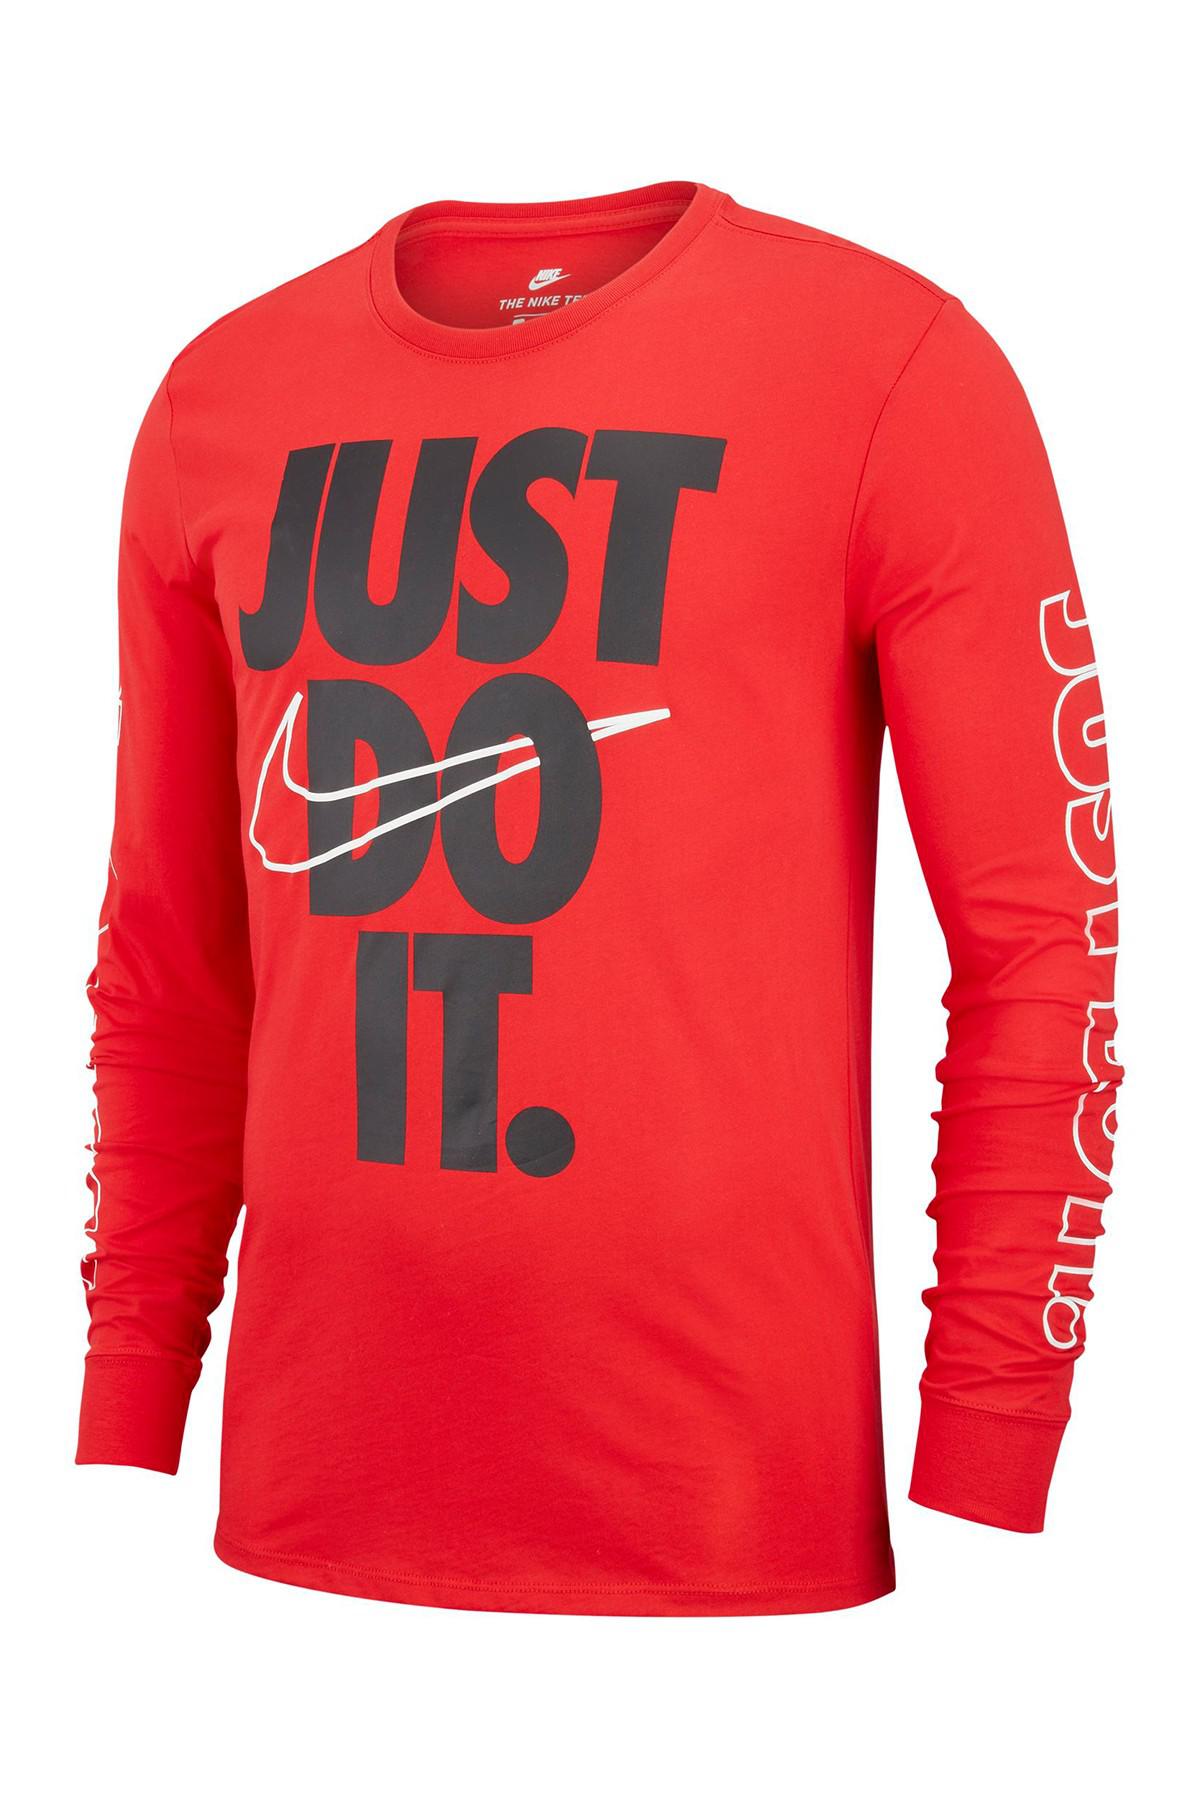 Nike Cotton Just Do It Long Sleeve Tee 